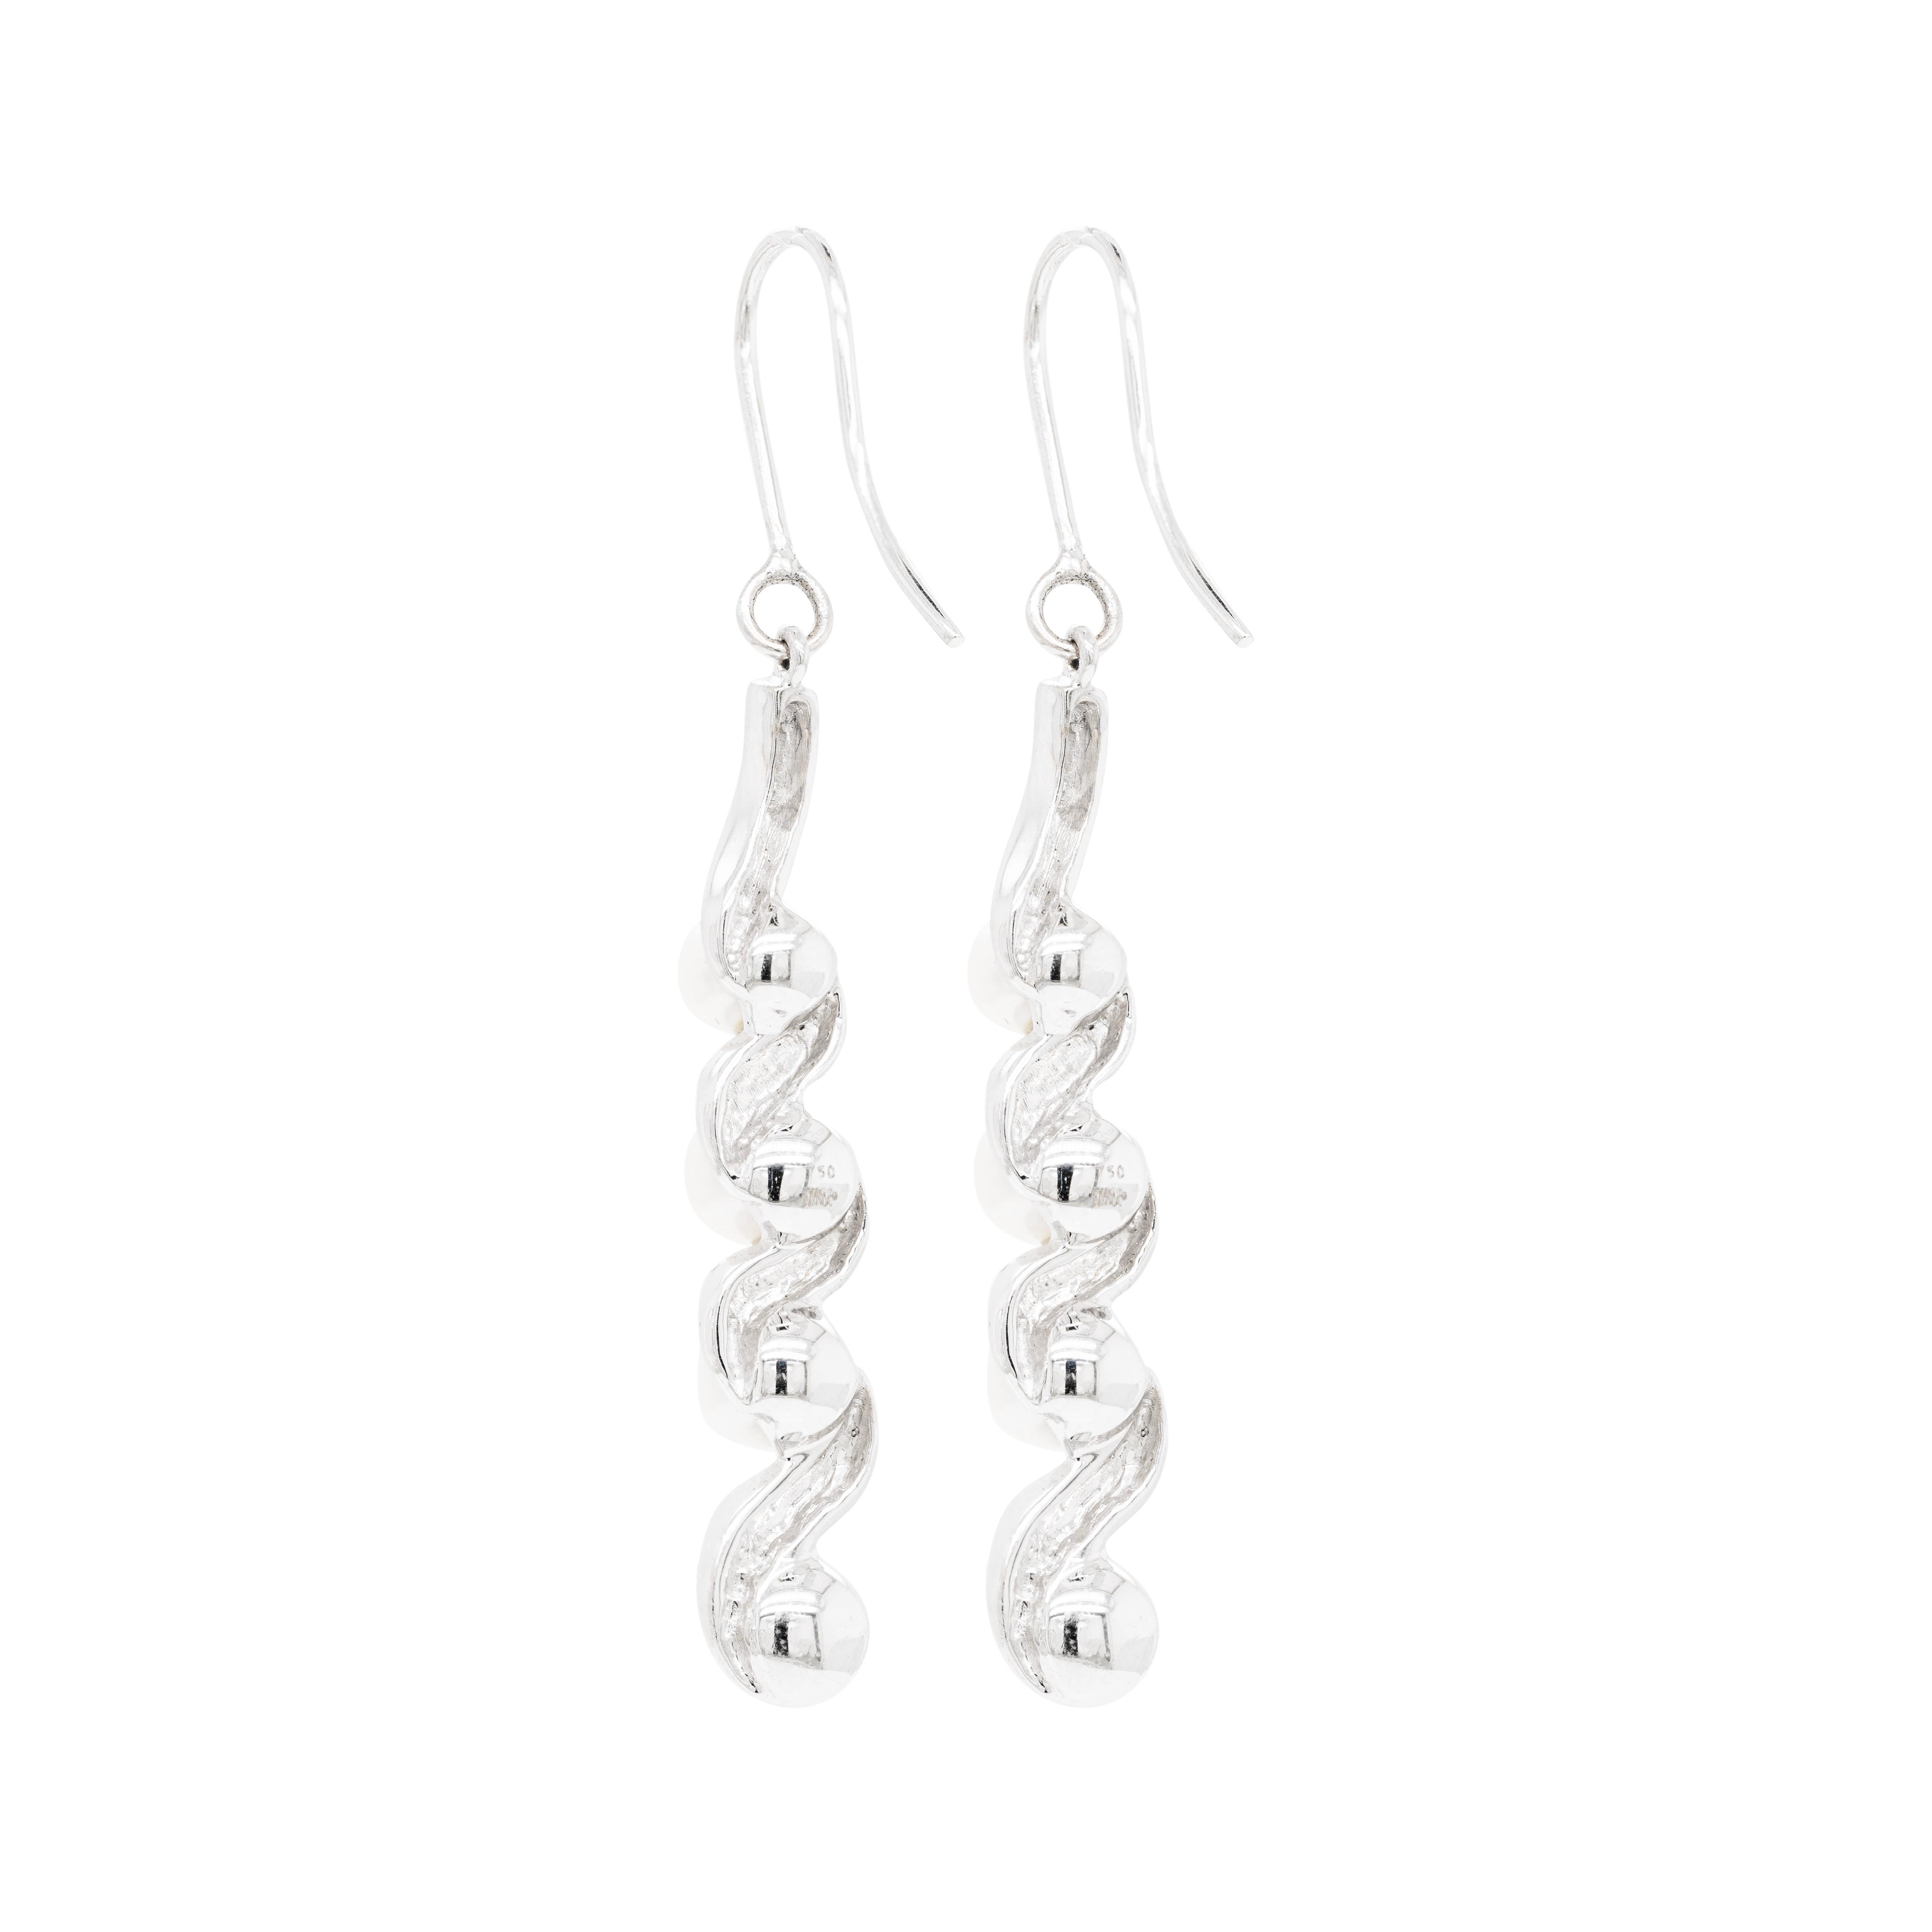 Elegant and beautiful, these drop earrings are designed with alternating black and white round brilliant cut diamonds set in 18 carat white gold swirls. Each piece features four cultured pearls measuring from 4.4mm to 6.1mm, delicately highlighting